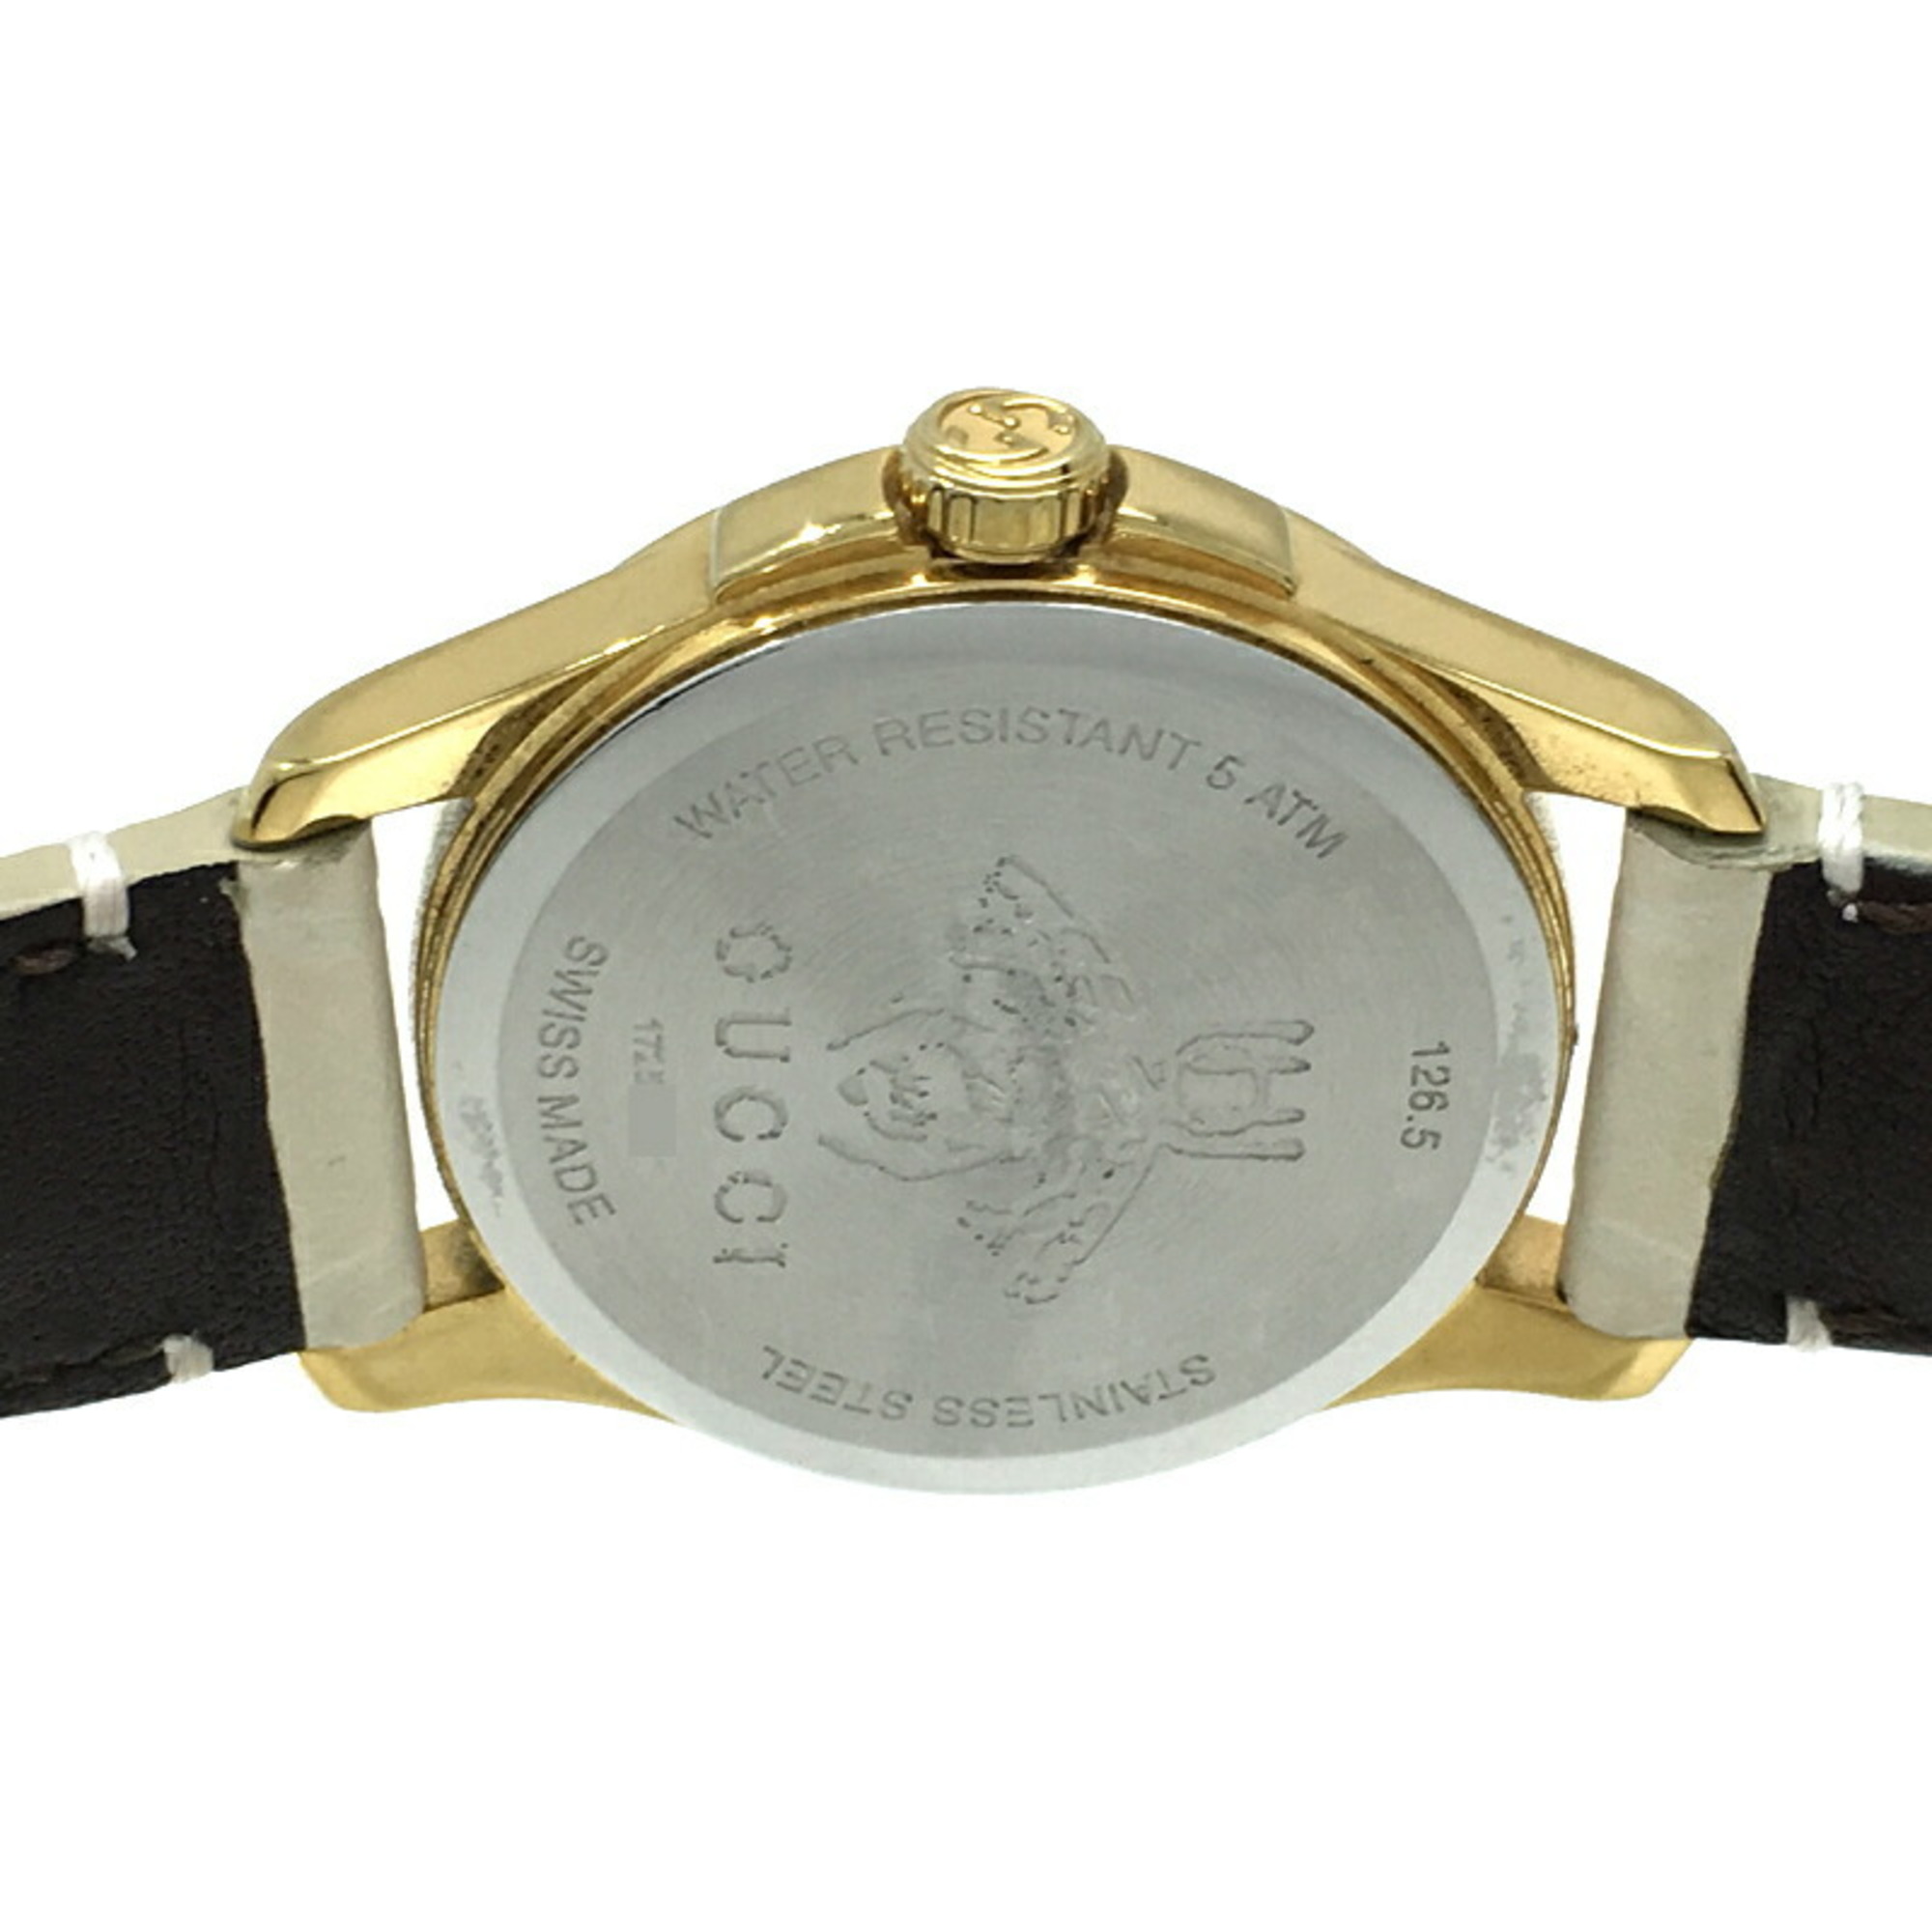 Gucci G Timeless Ladies Watch YA126580 126.5 Gold Plated White Shima Dial